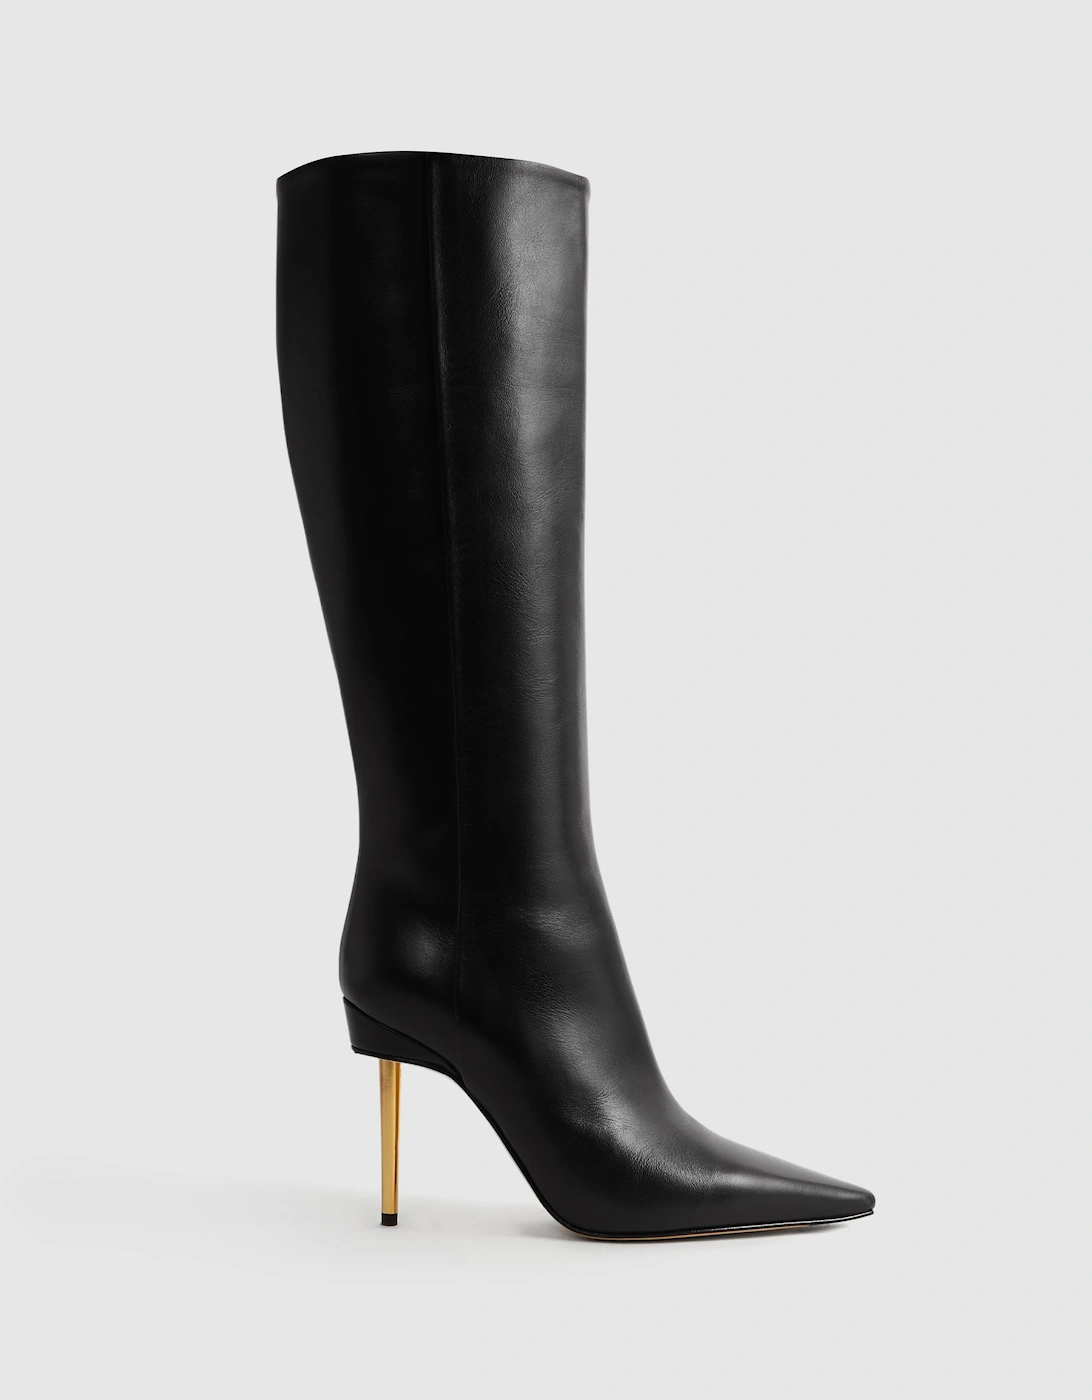 Atelier Italian Leather Heeled Knee-High Boots, 2 of 1